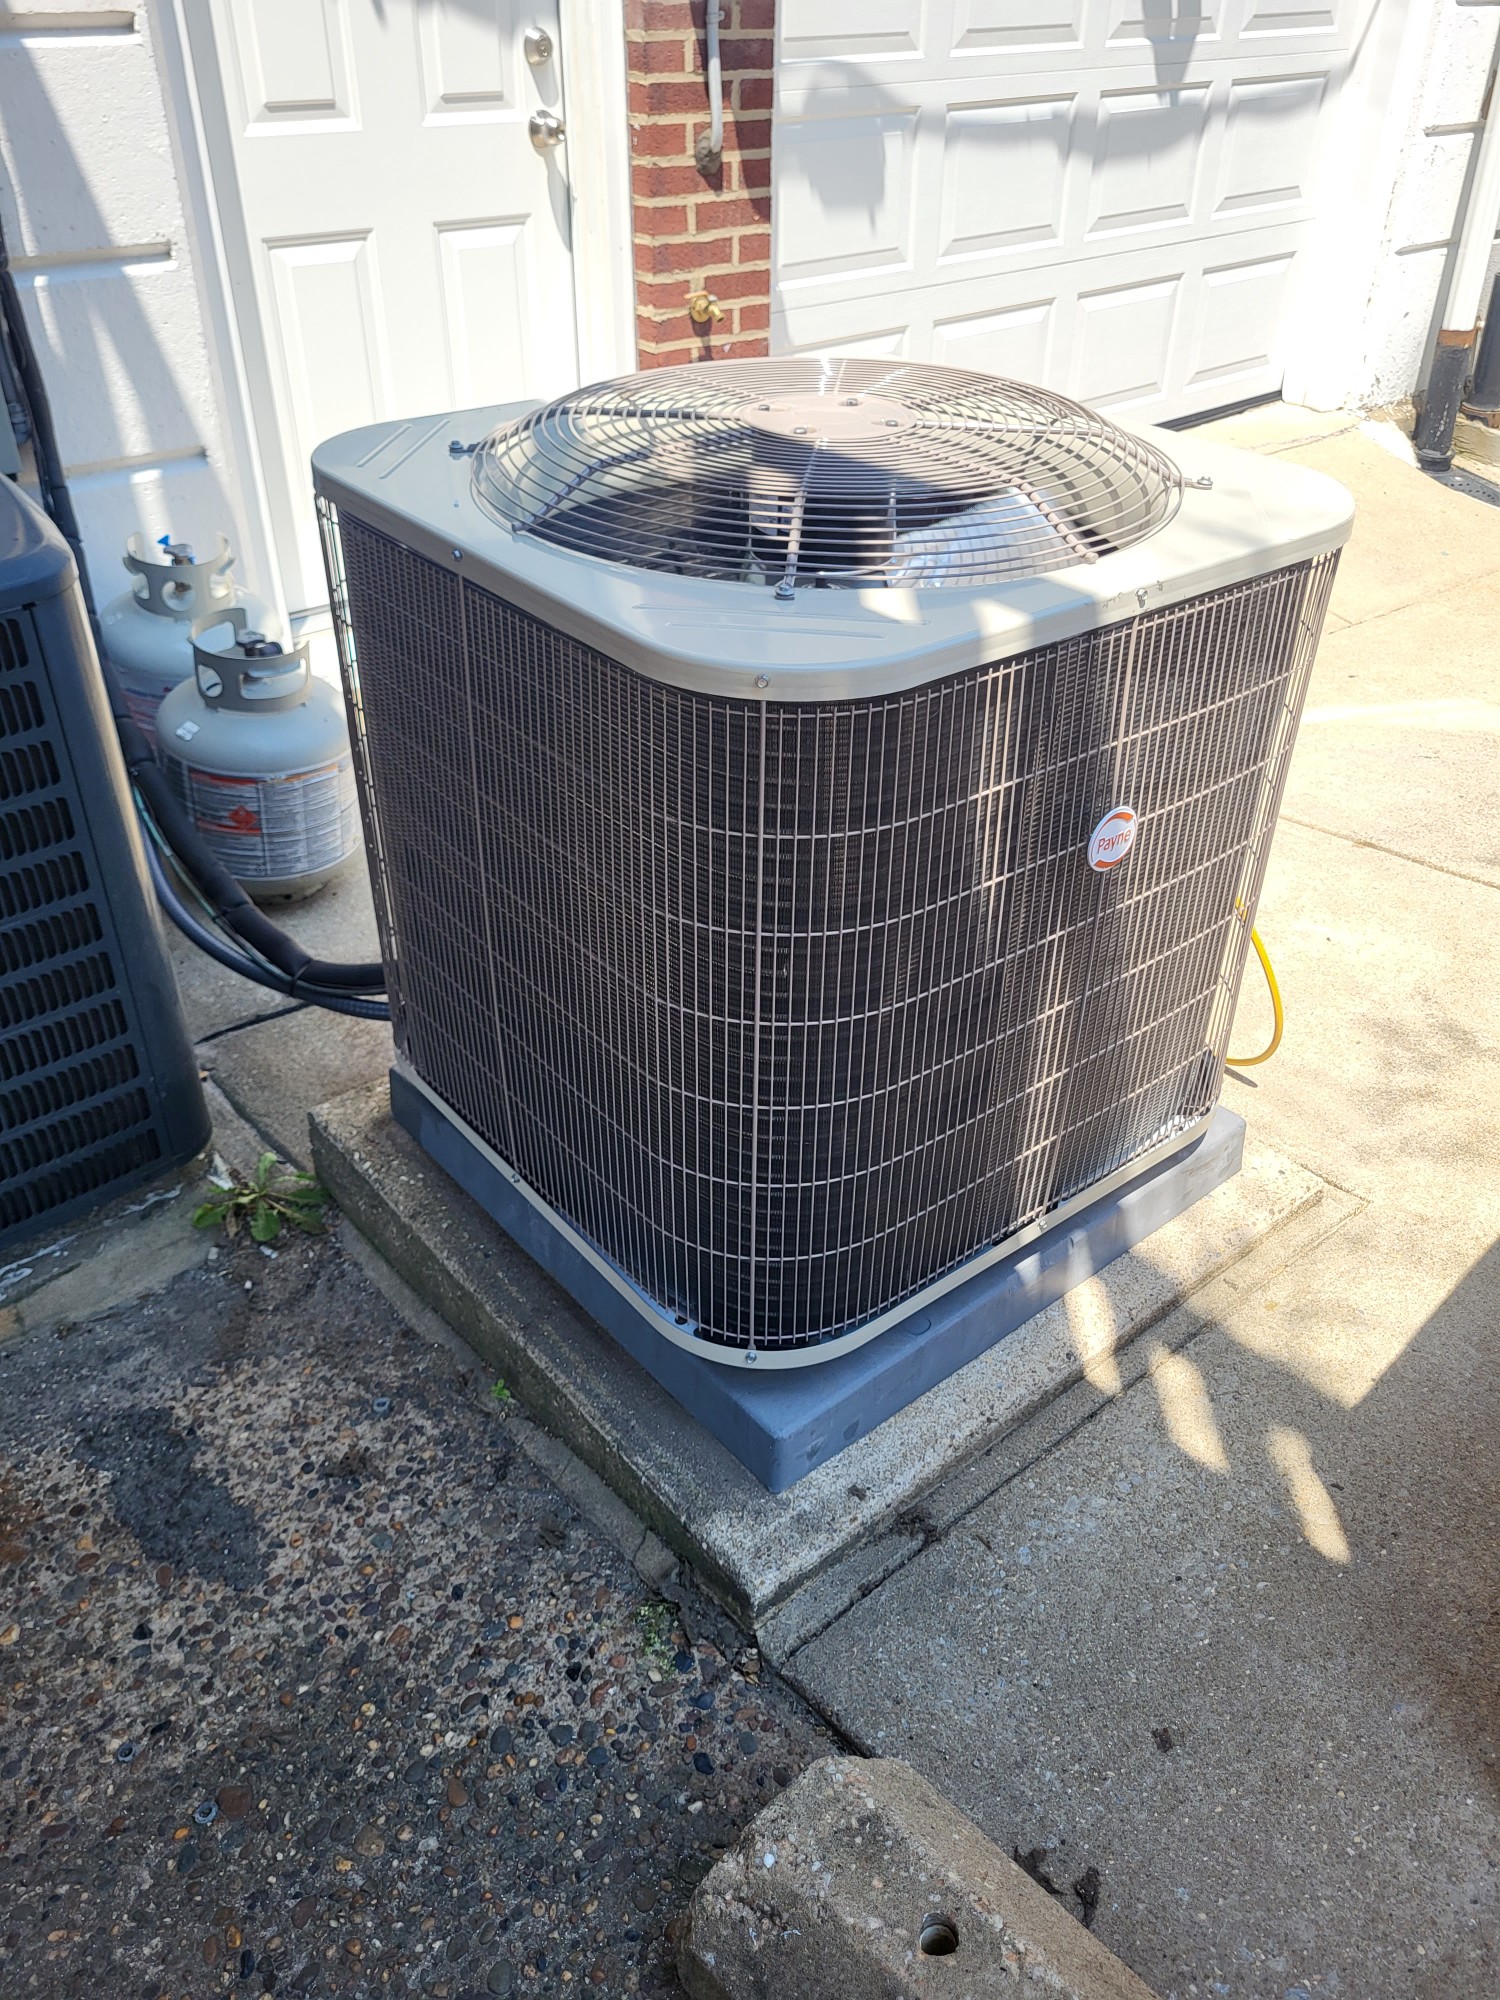 Tri-State Heating & Air Conditioning